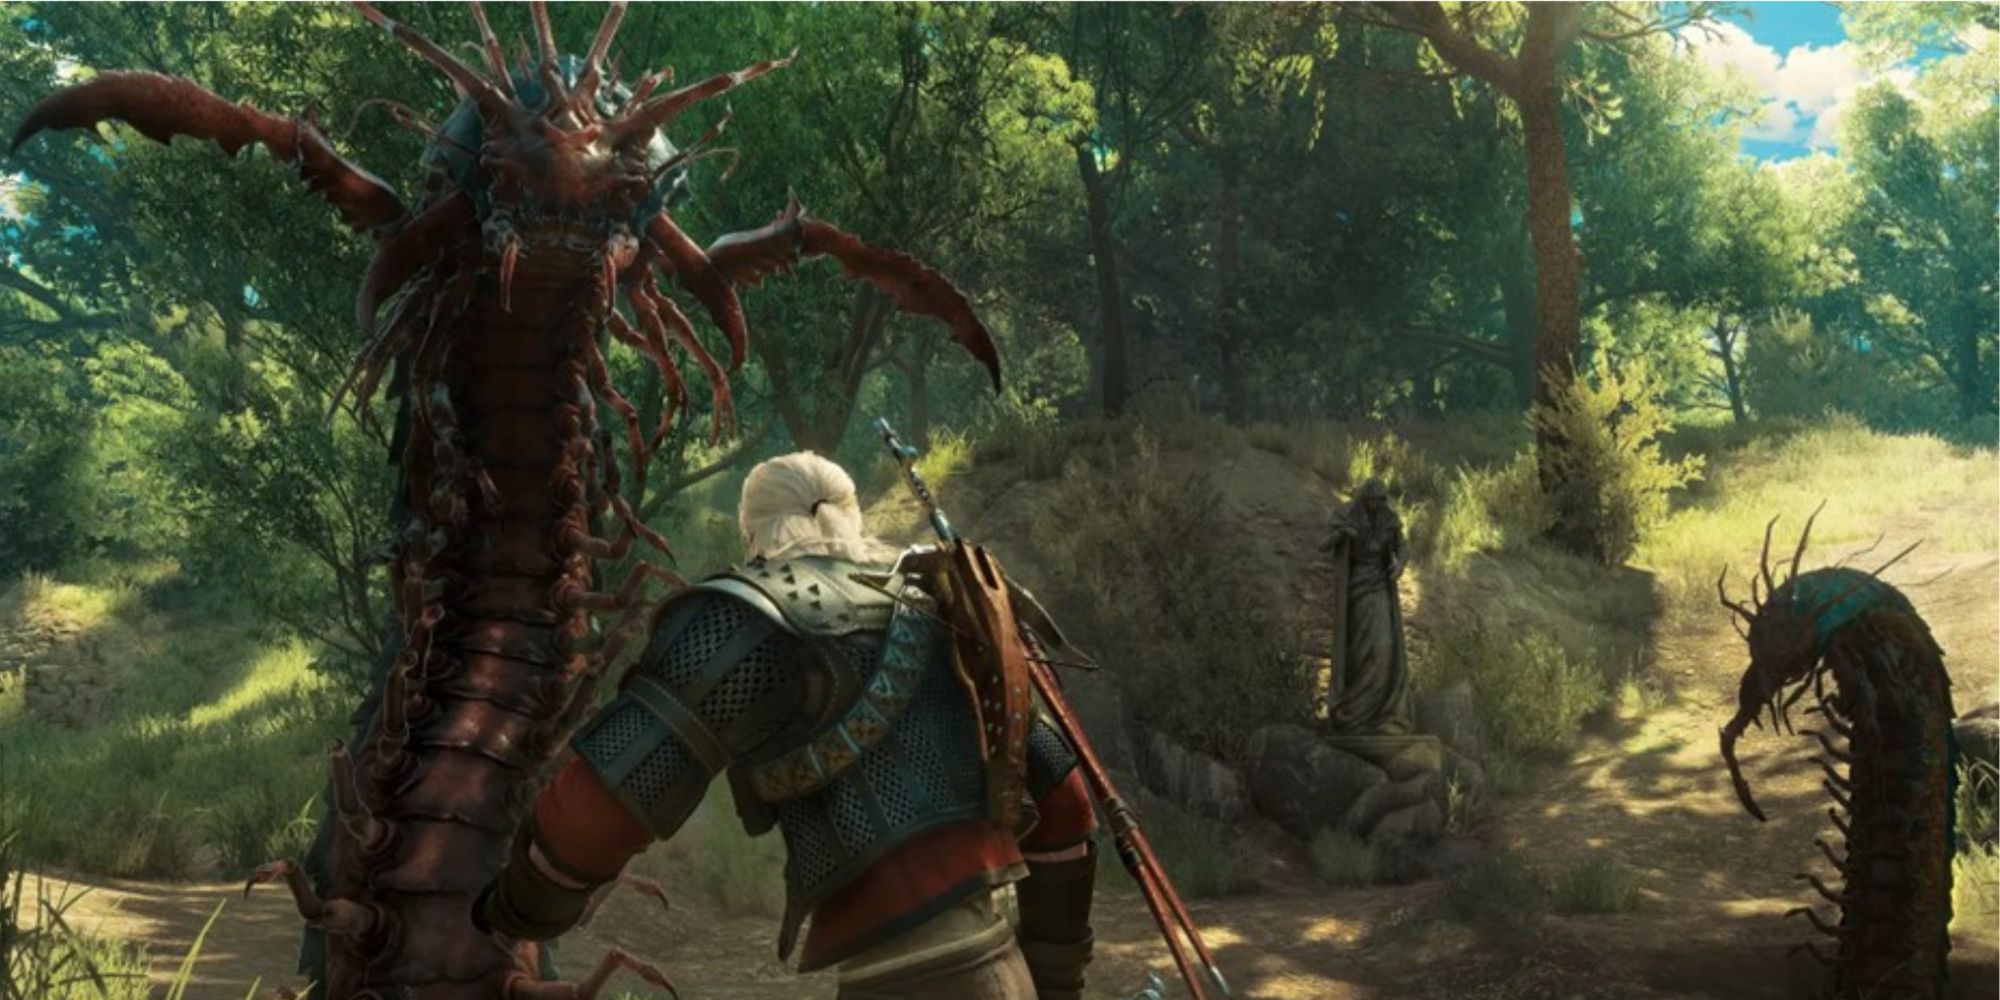 Geralt faces off against two giant tomcades in The Witcher 3